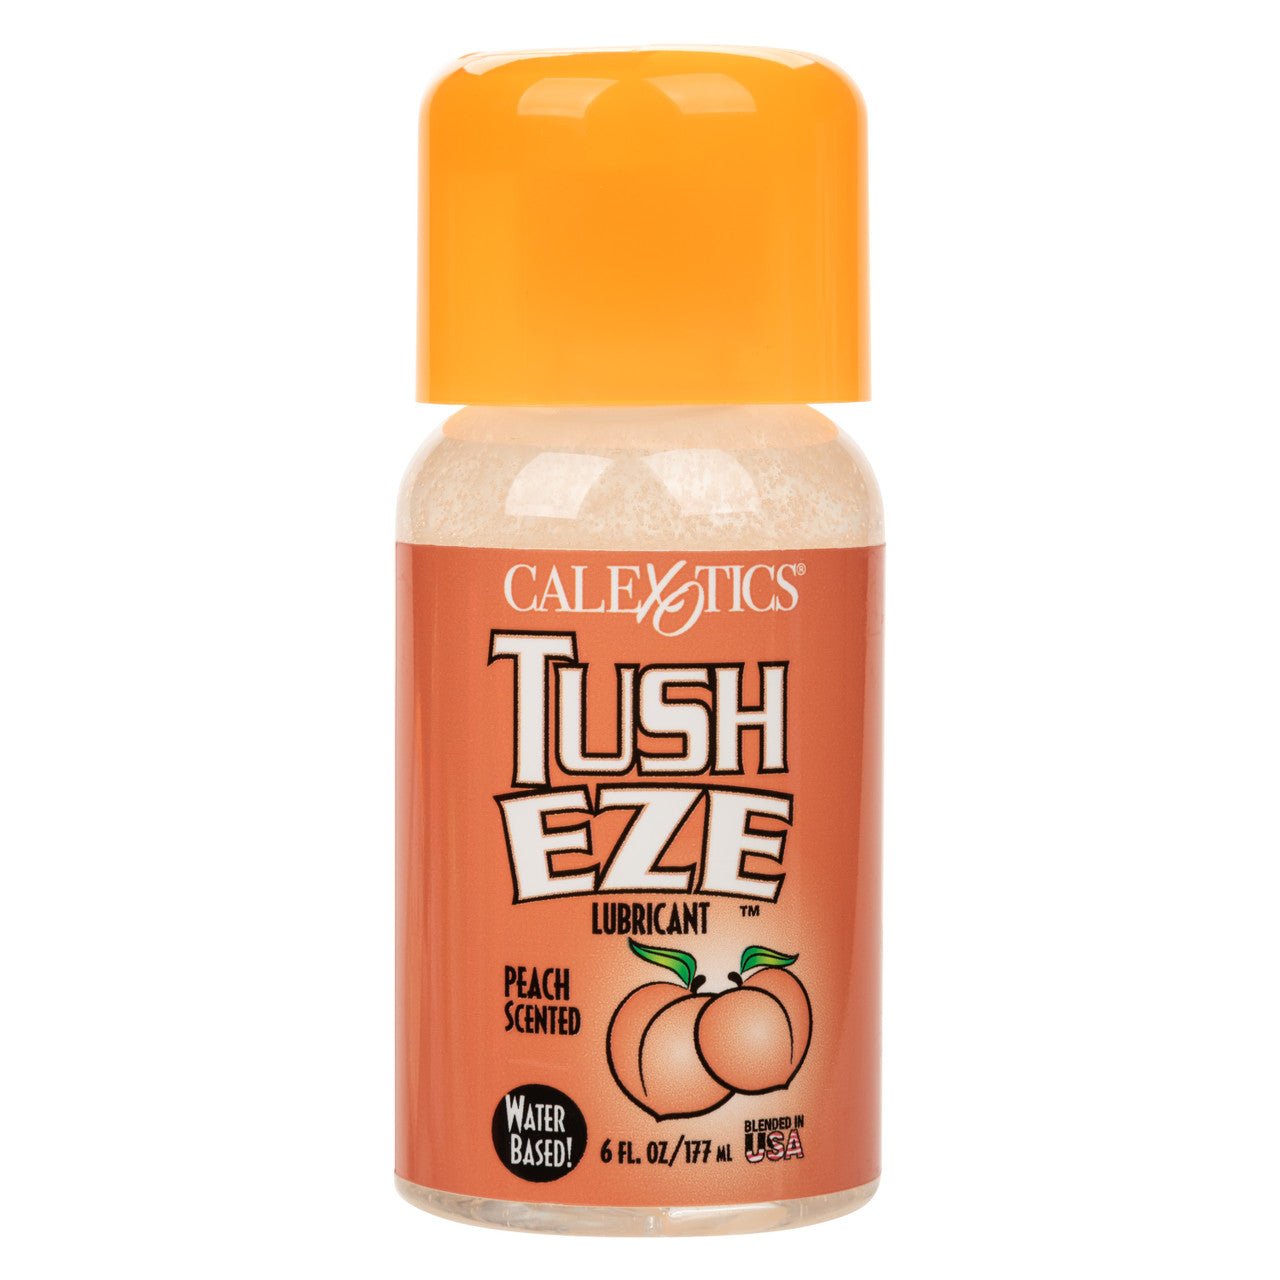 Tush Eze Flavored Lubricant - 6 oz (177 mL) - 2 Flavors Available | CheapLubes.com